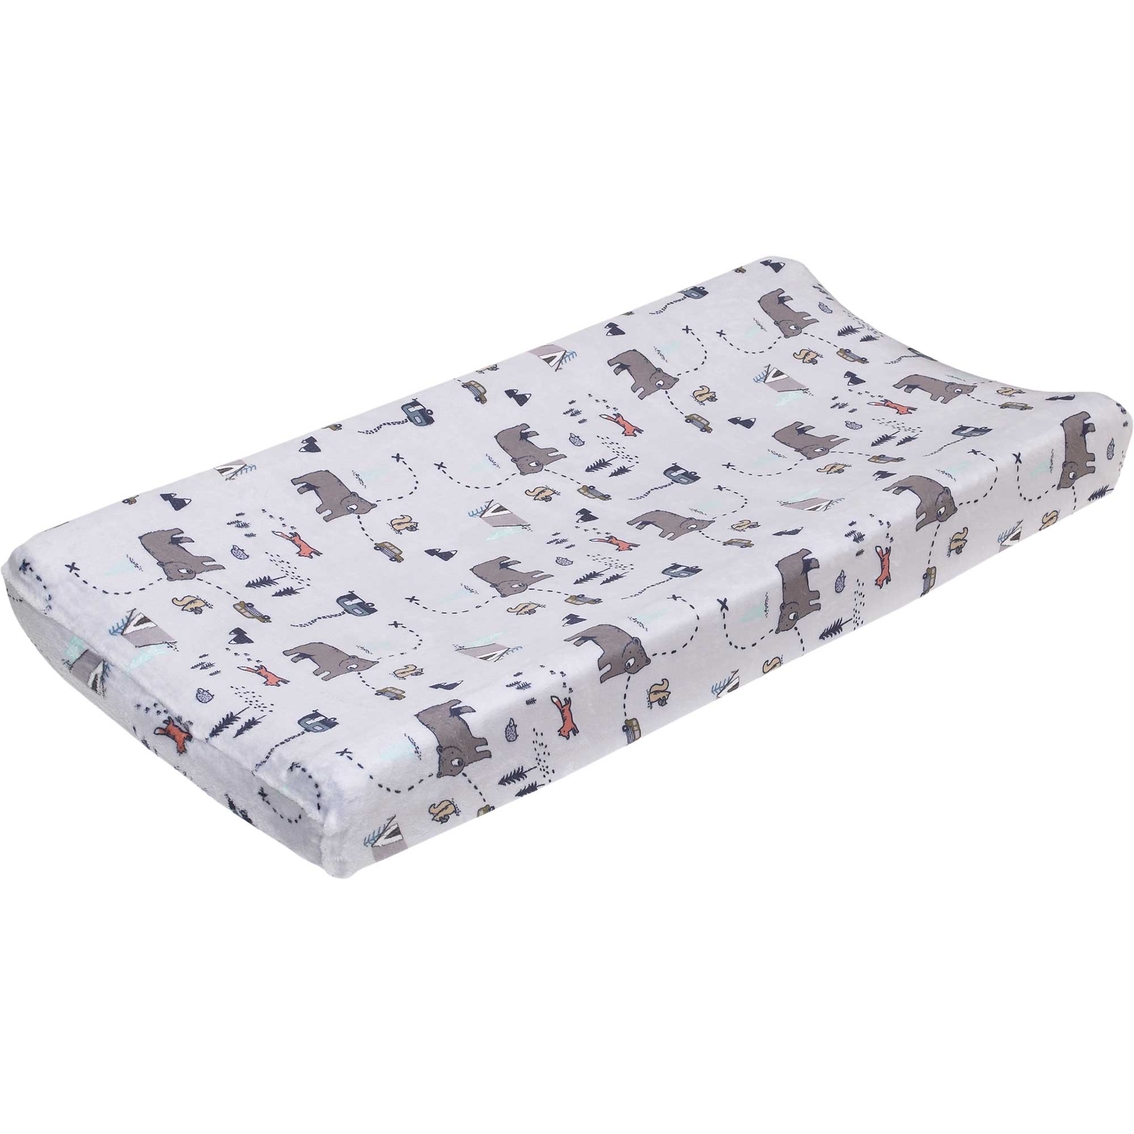 Carter's Woodland Friends Super Soft Changing Pad Cover - Image 1 of 3